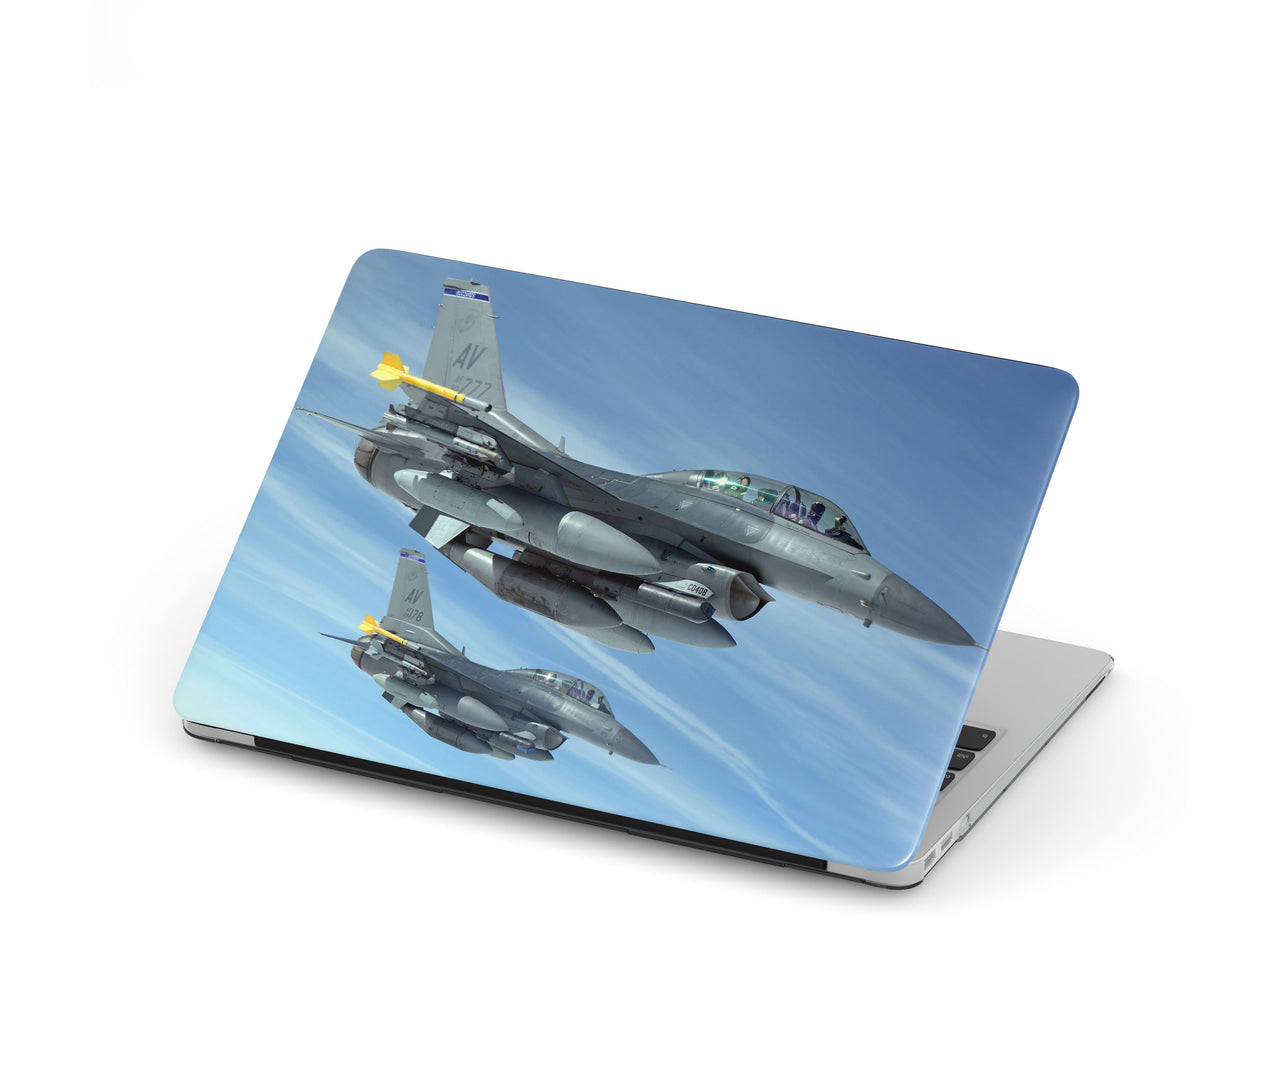 Two Fighting Falcon Designed Macbook Cases